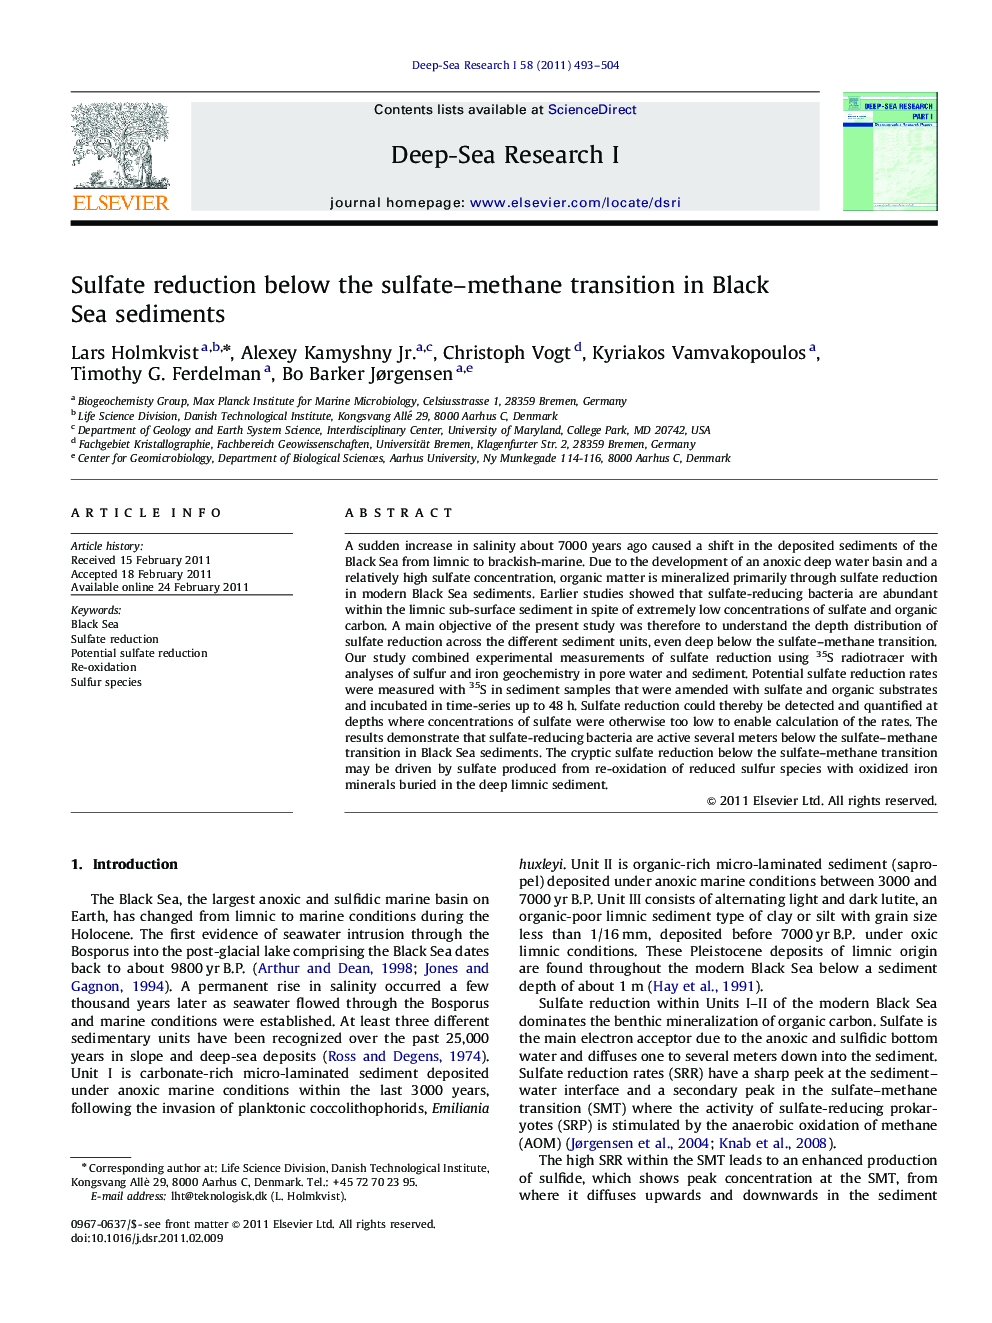 Sulfate reduction below the sulfate–methane transition in Black Sea sediments